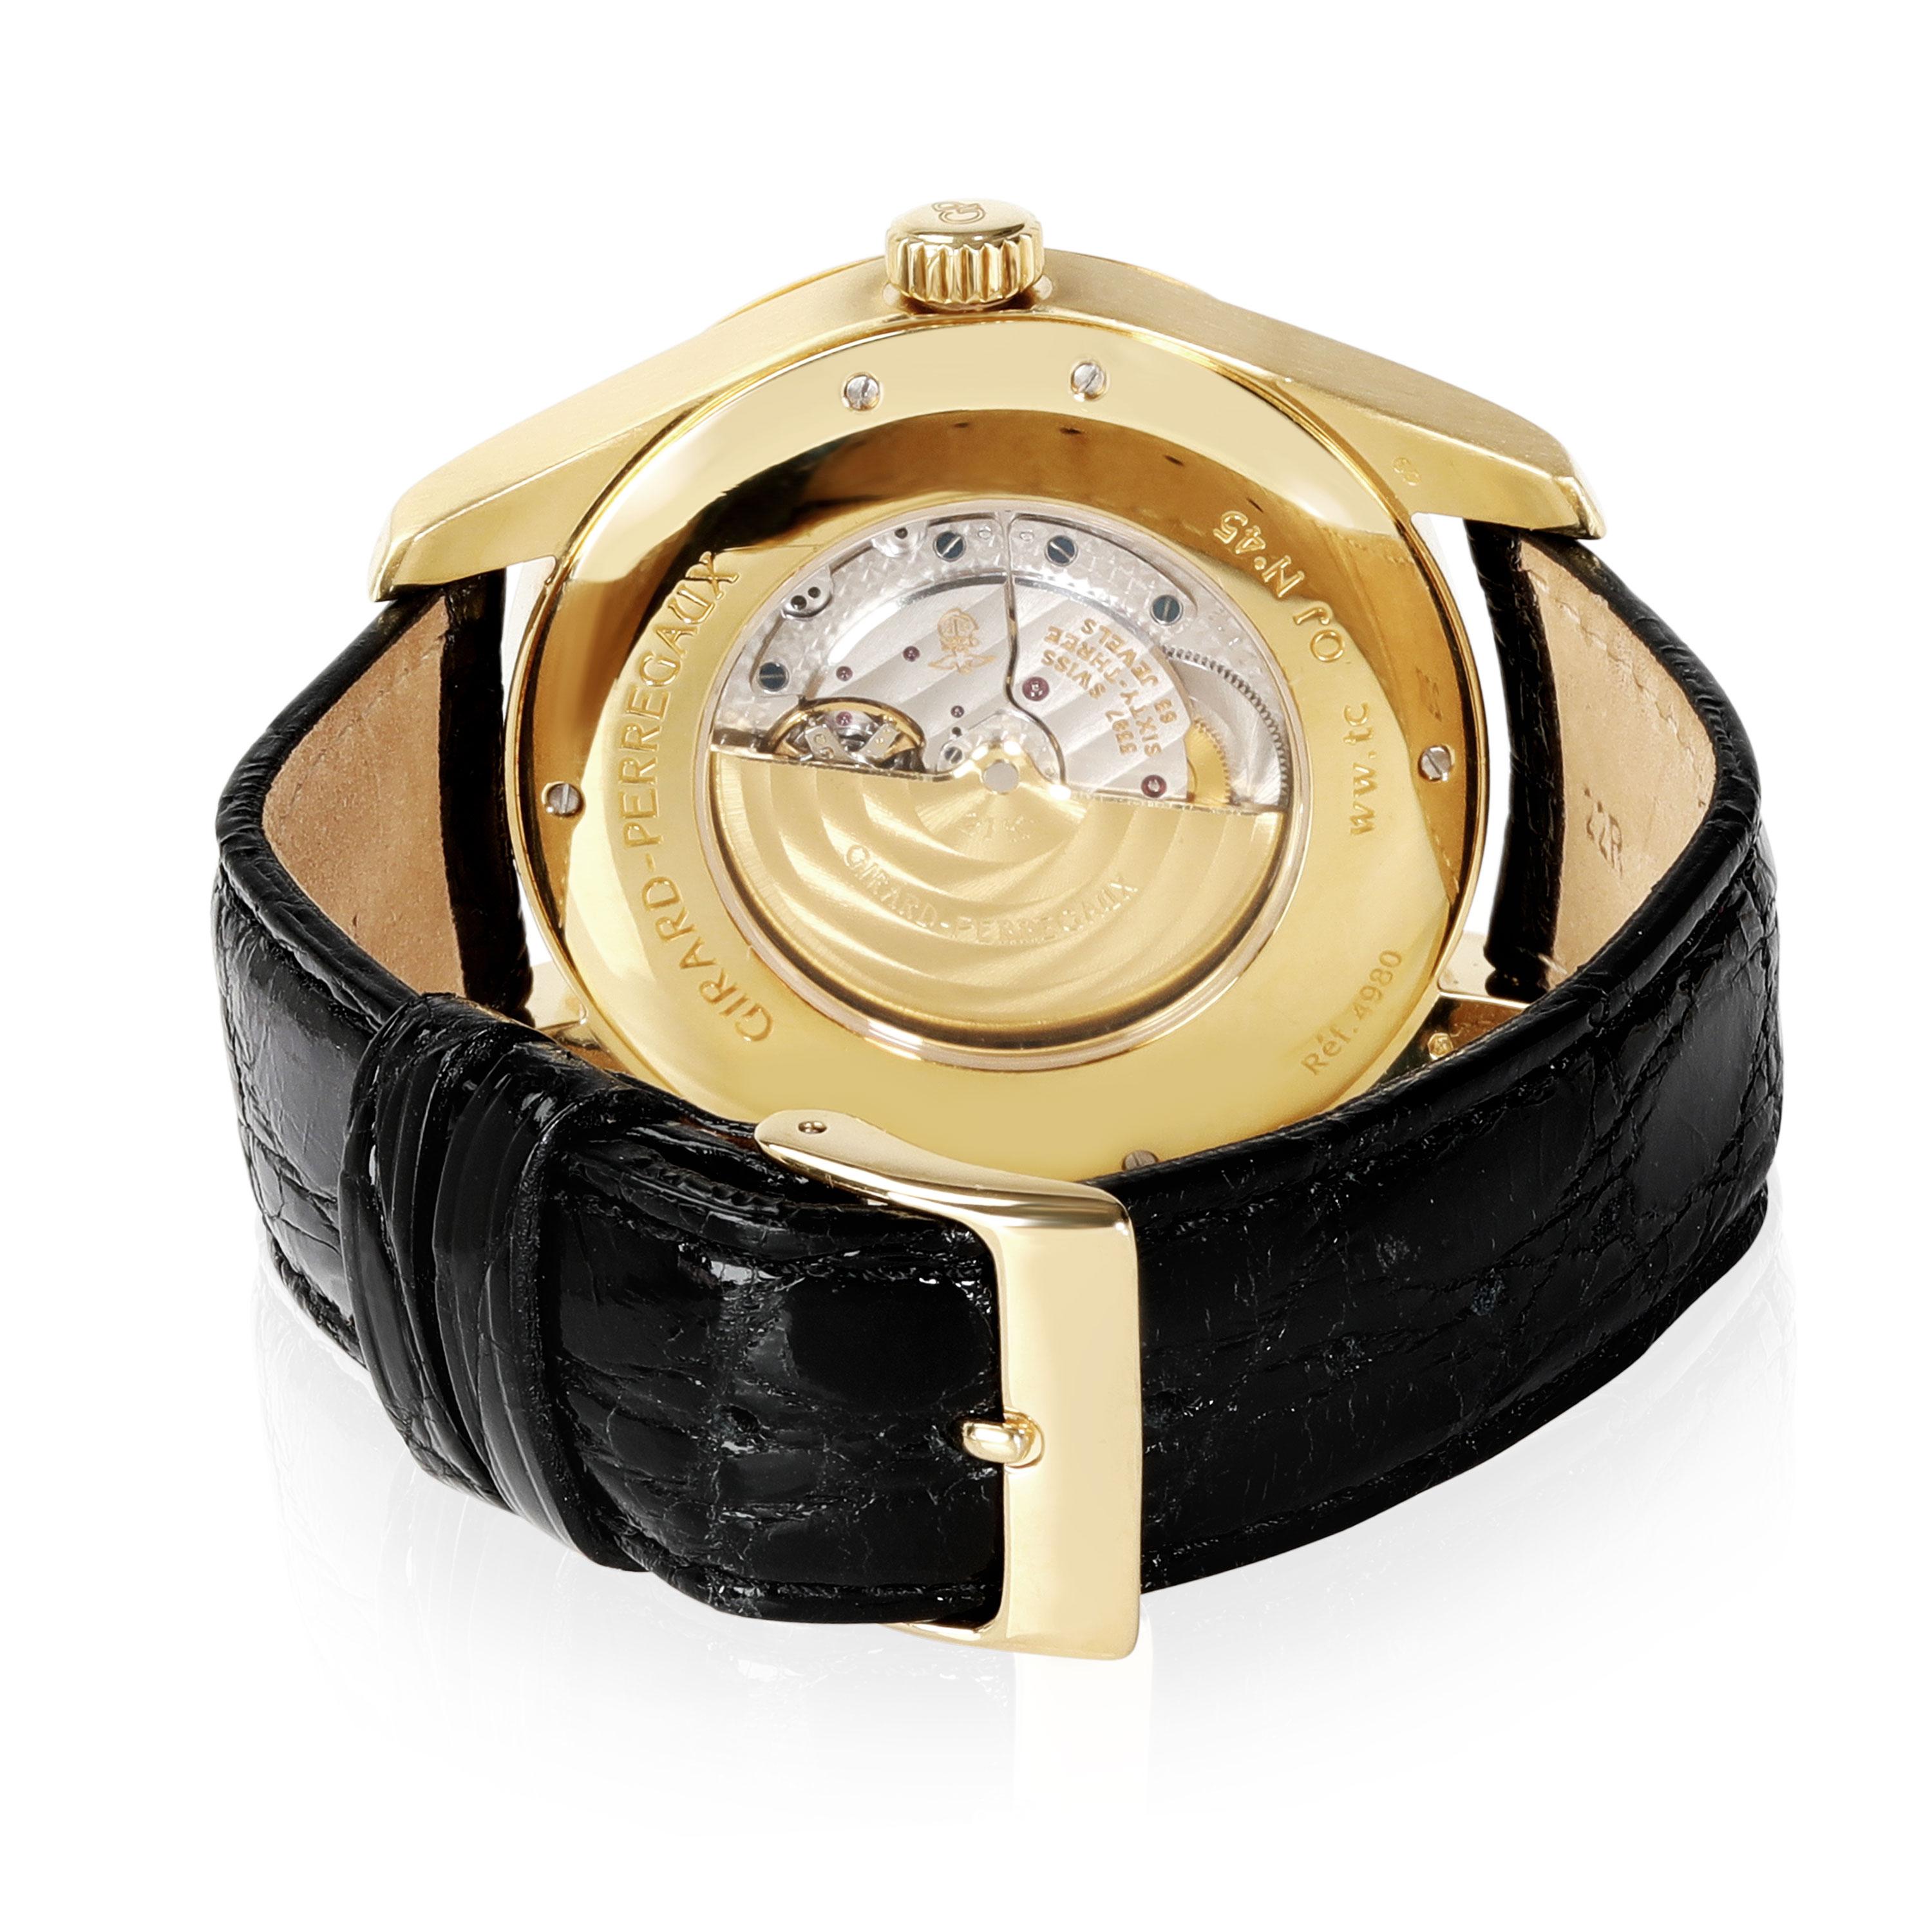 
Girard Perregaux WW.TC Traveller 4980 Men's Watch in 18kt Yellow Gold

SKU: 113857

PRIMARY DETAILS
Brand:  Girard Perregaux
Model: WW.TC Traveller
Country of Origin: Switzerland
Movement Type: Mechanical: Automatic/Kinetic
Year Manufactured: 
Year